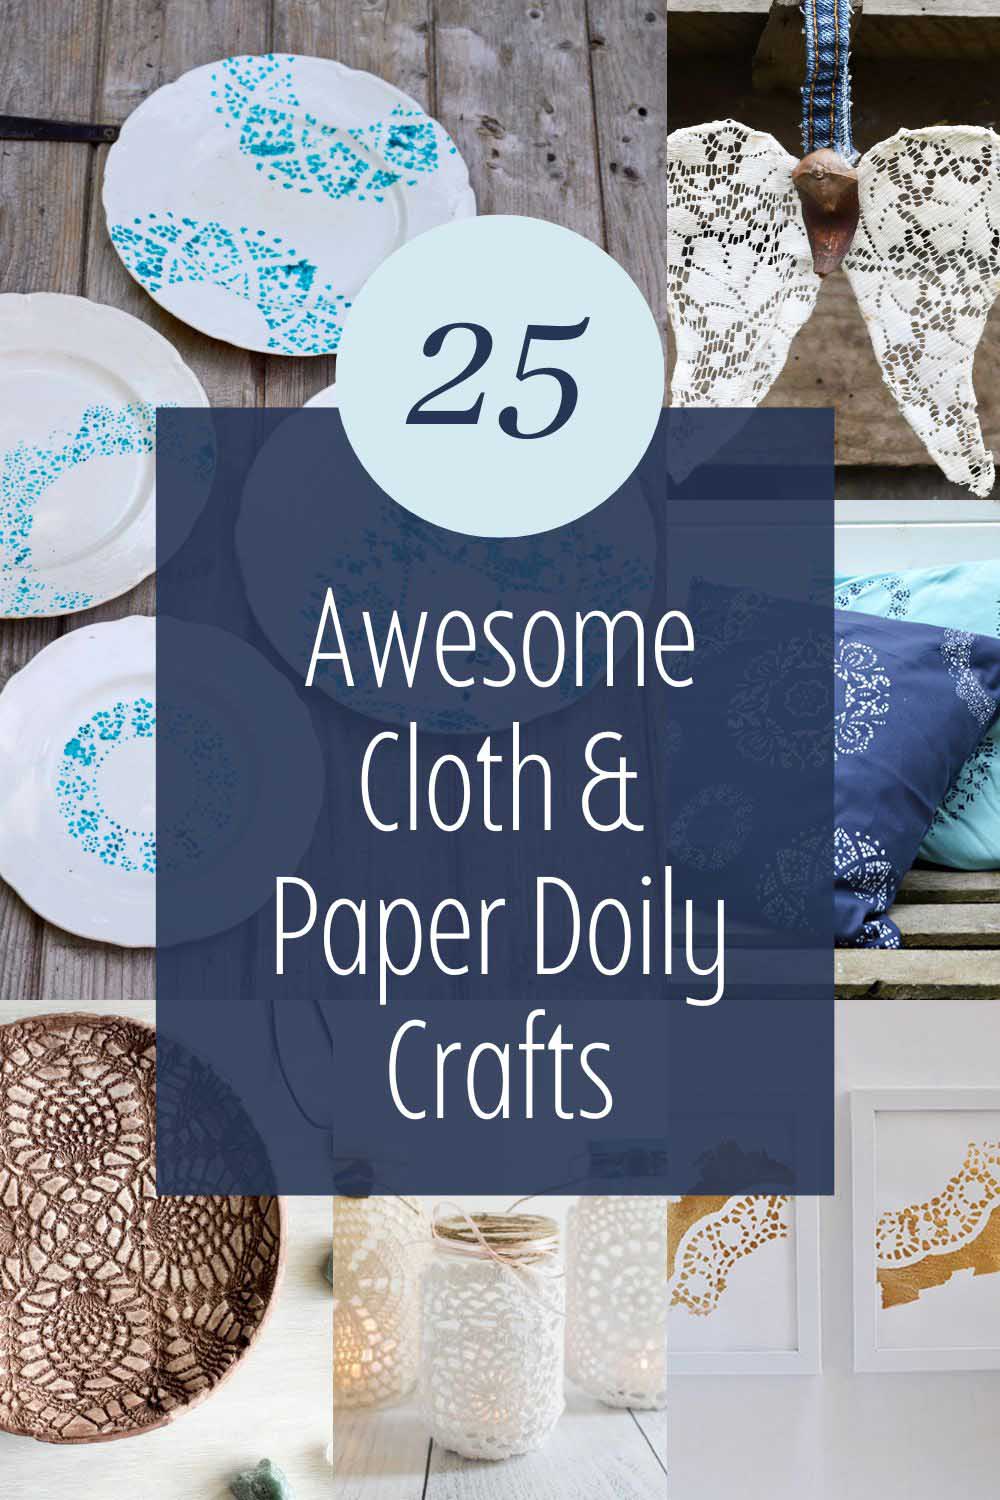 26 Easy Cloth and Paper Doily Crafts I Can't Wait To Try - Pillar Box Blue